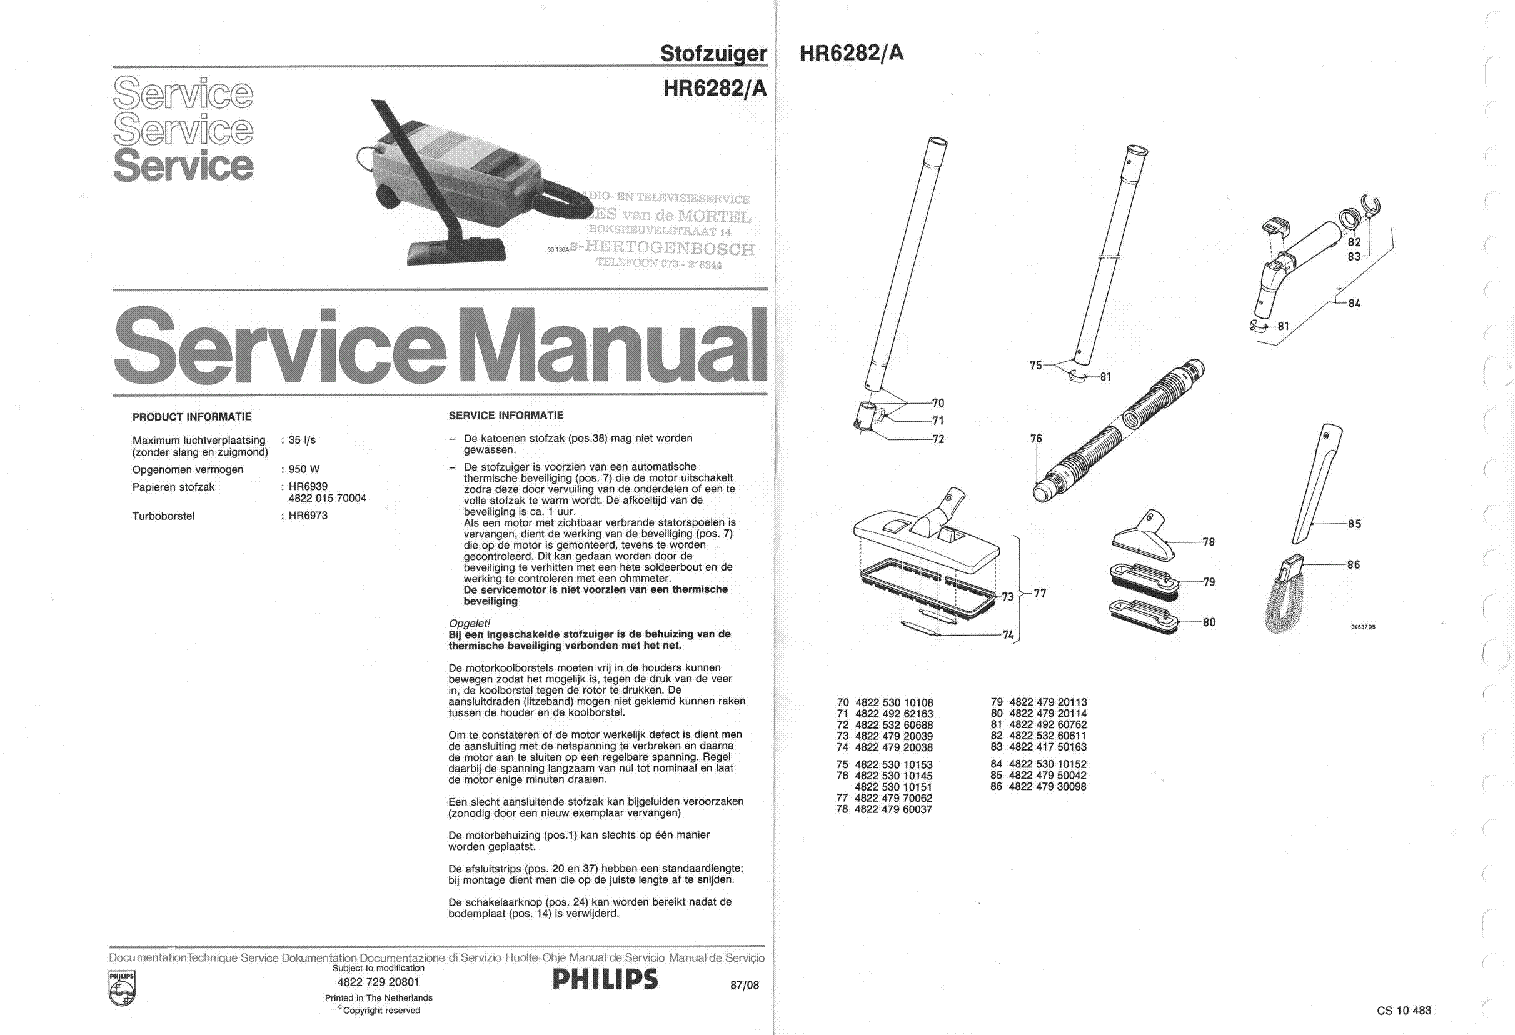 PHILIPS HR6282-A SM service manual (1st page)